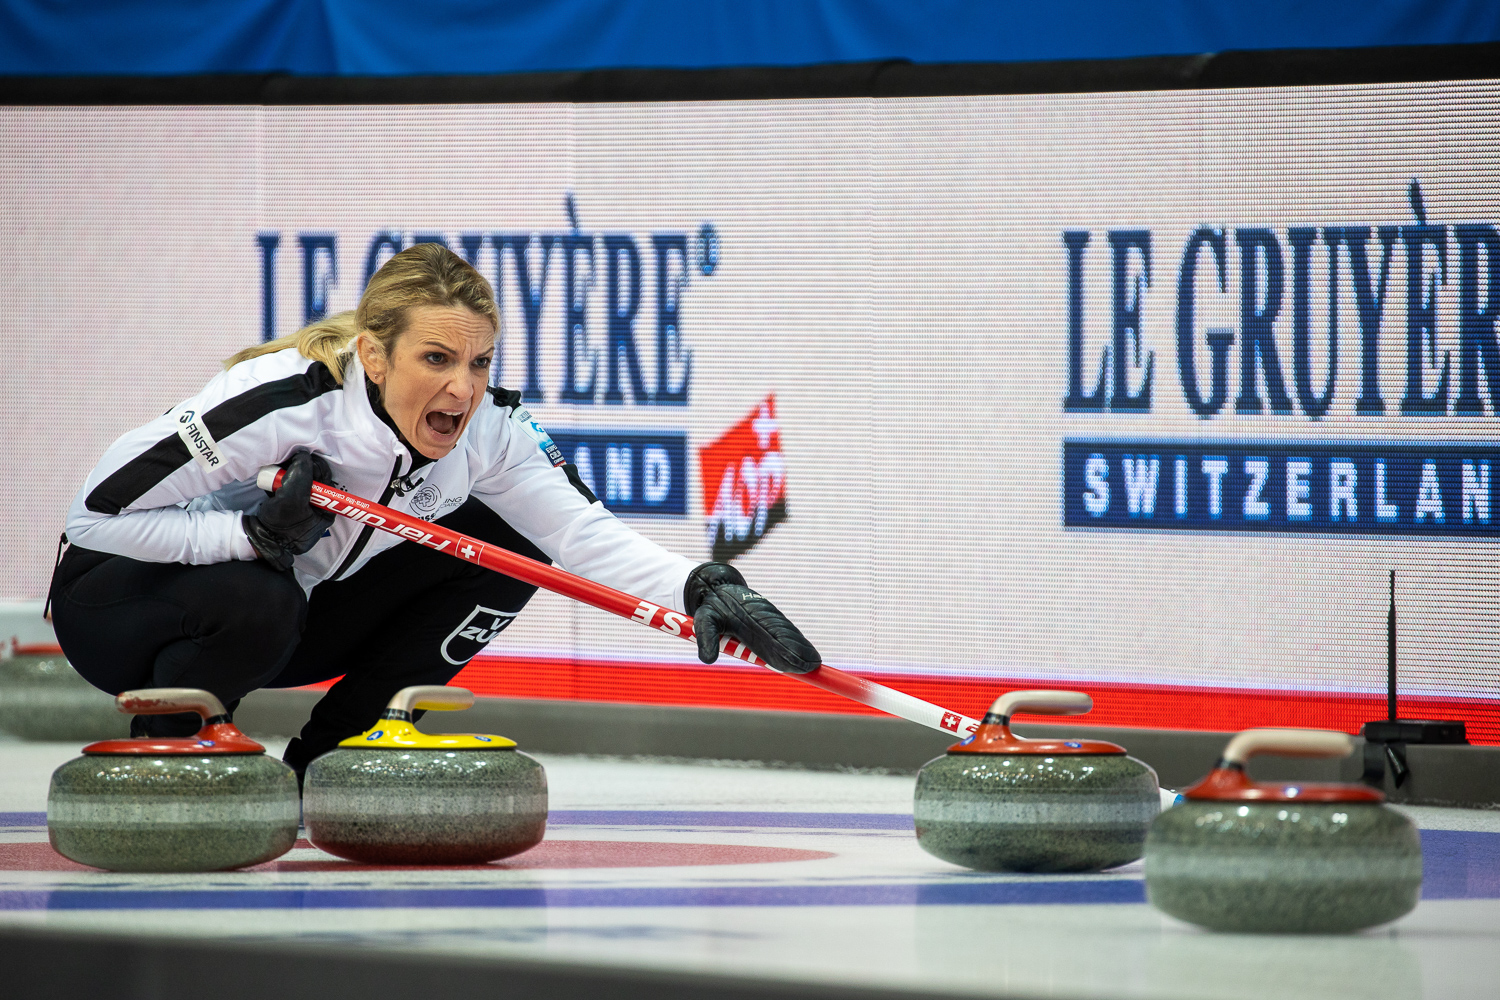 CurlingZone World champs Tirinzoni continue winning ways in opening game at Players